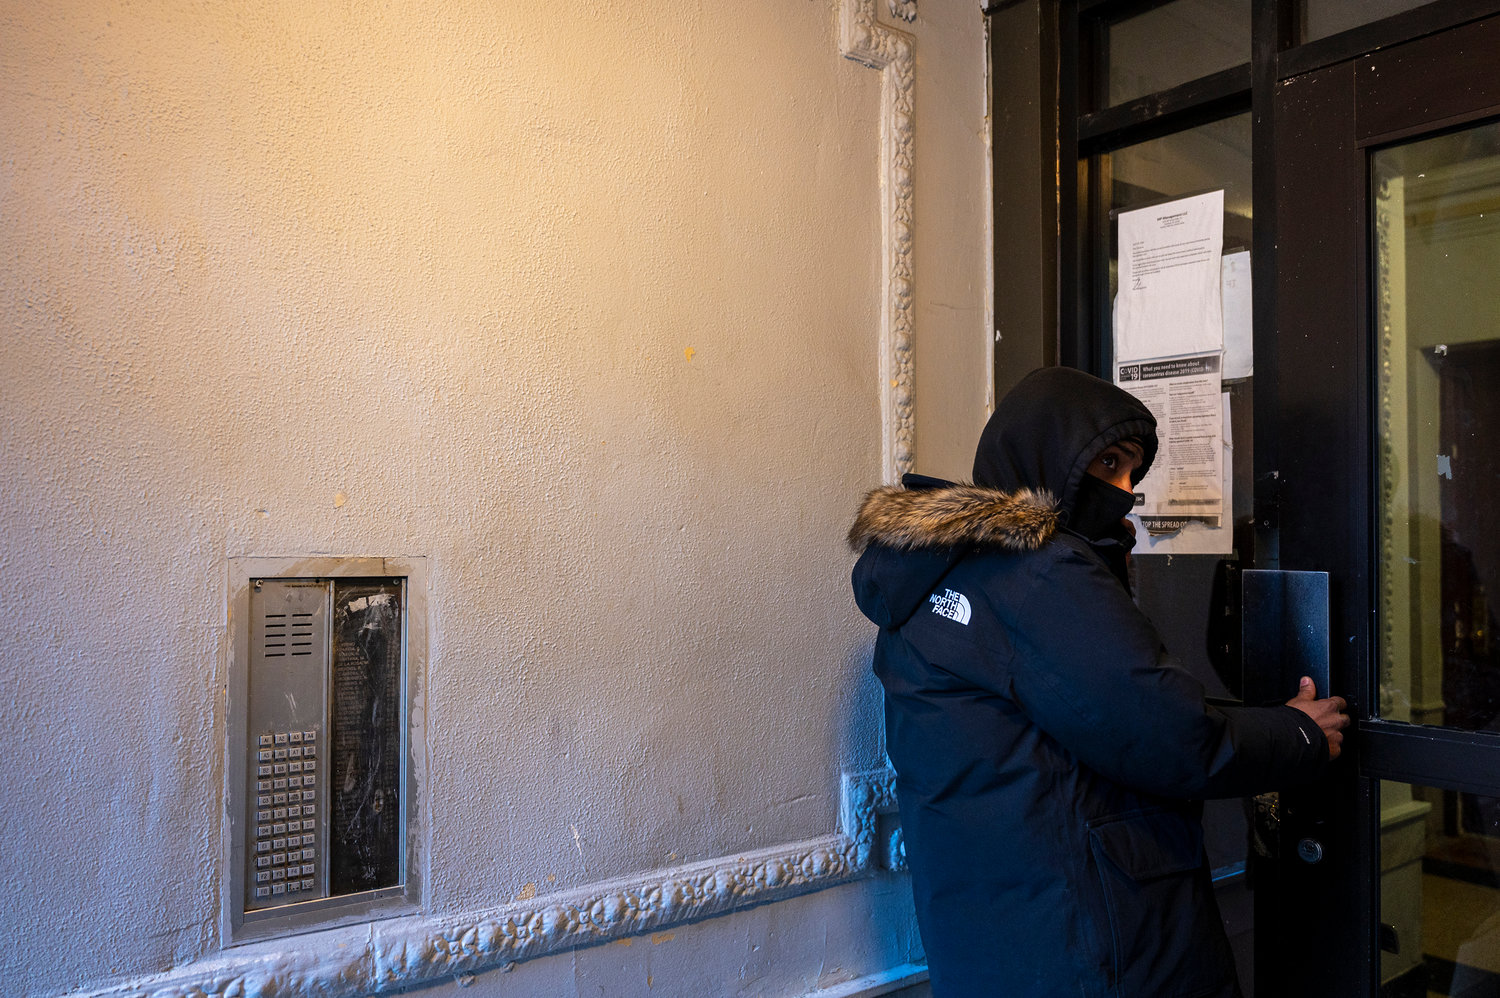 A man visiting 16 Marble Hill Ave., waits for someone to come open the door for him because the bells don’t work. Residents have also complained about other faulty services in the building as well, like heat, gas and plumbing. Some have even complained about collapsing ceilings — more than once.